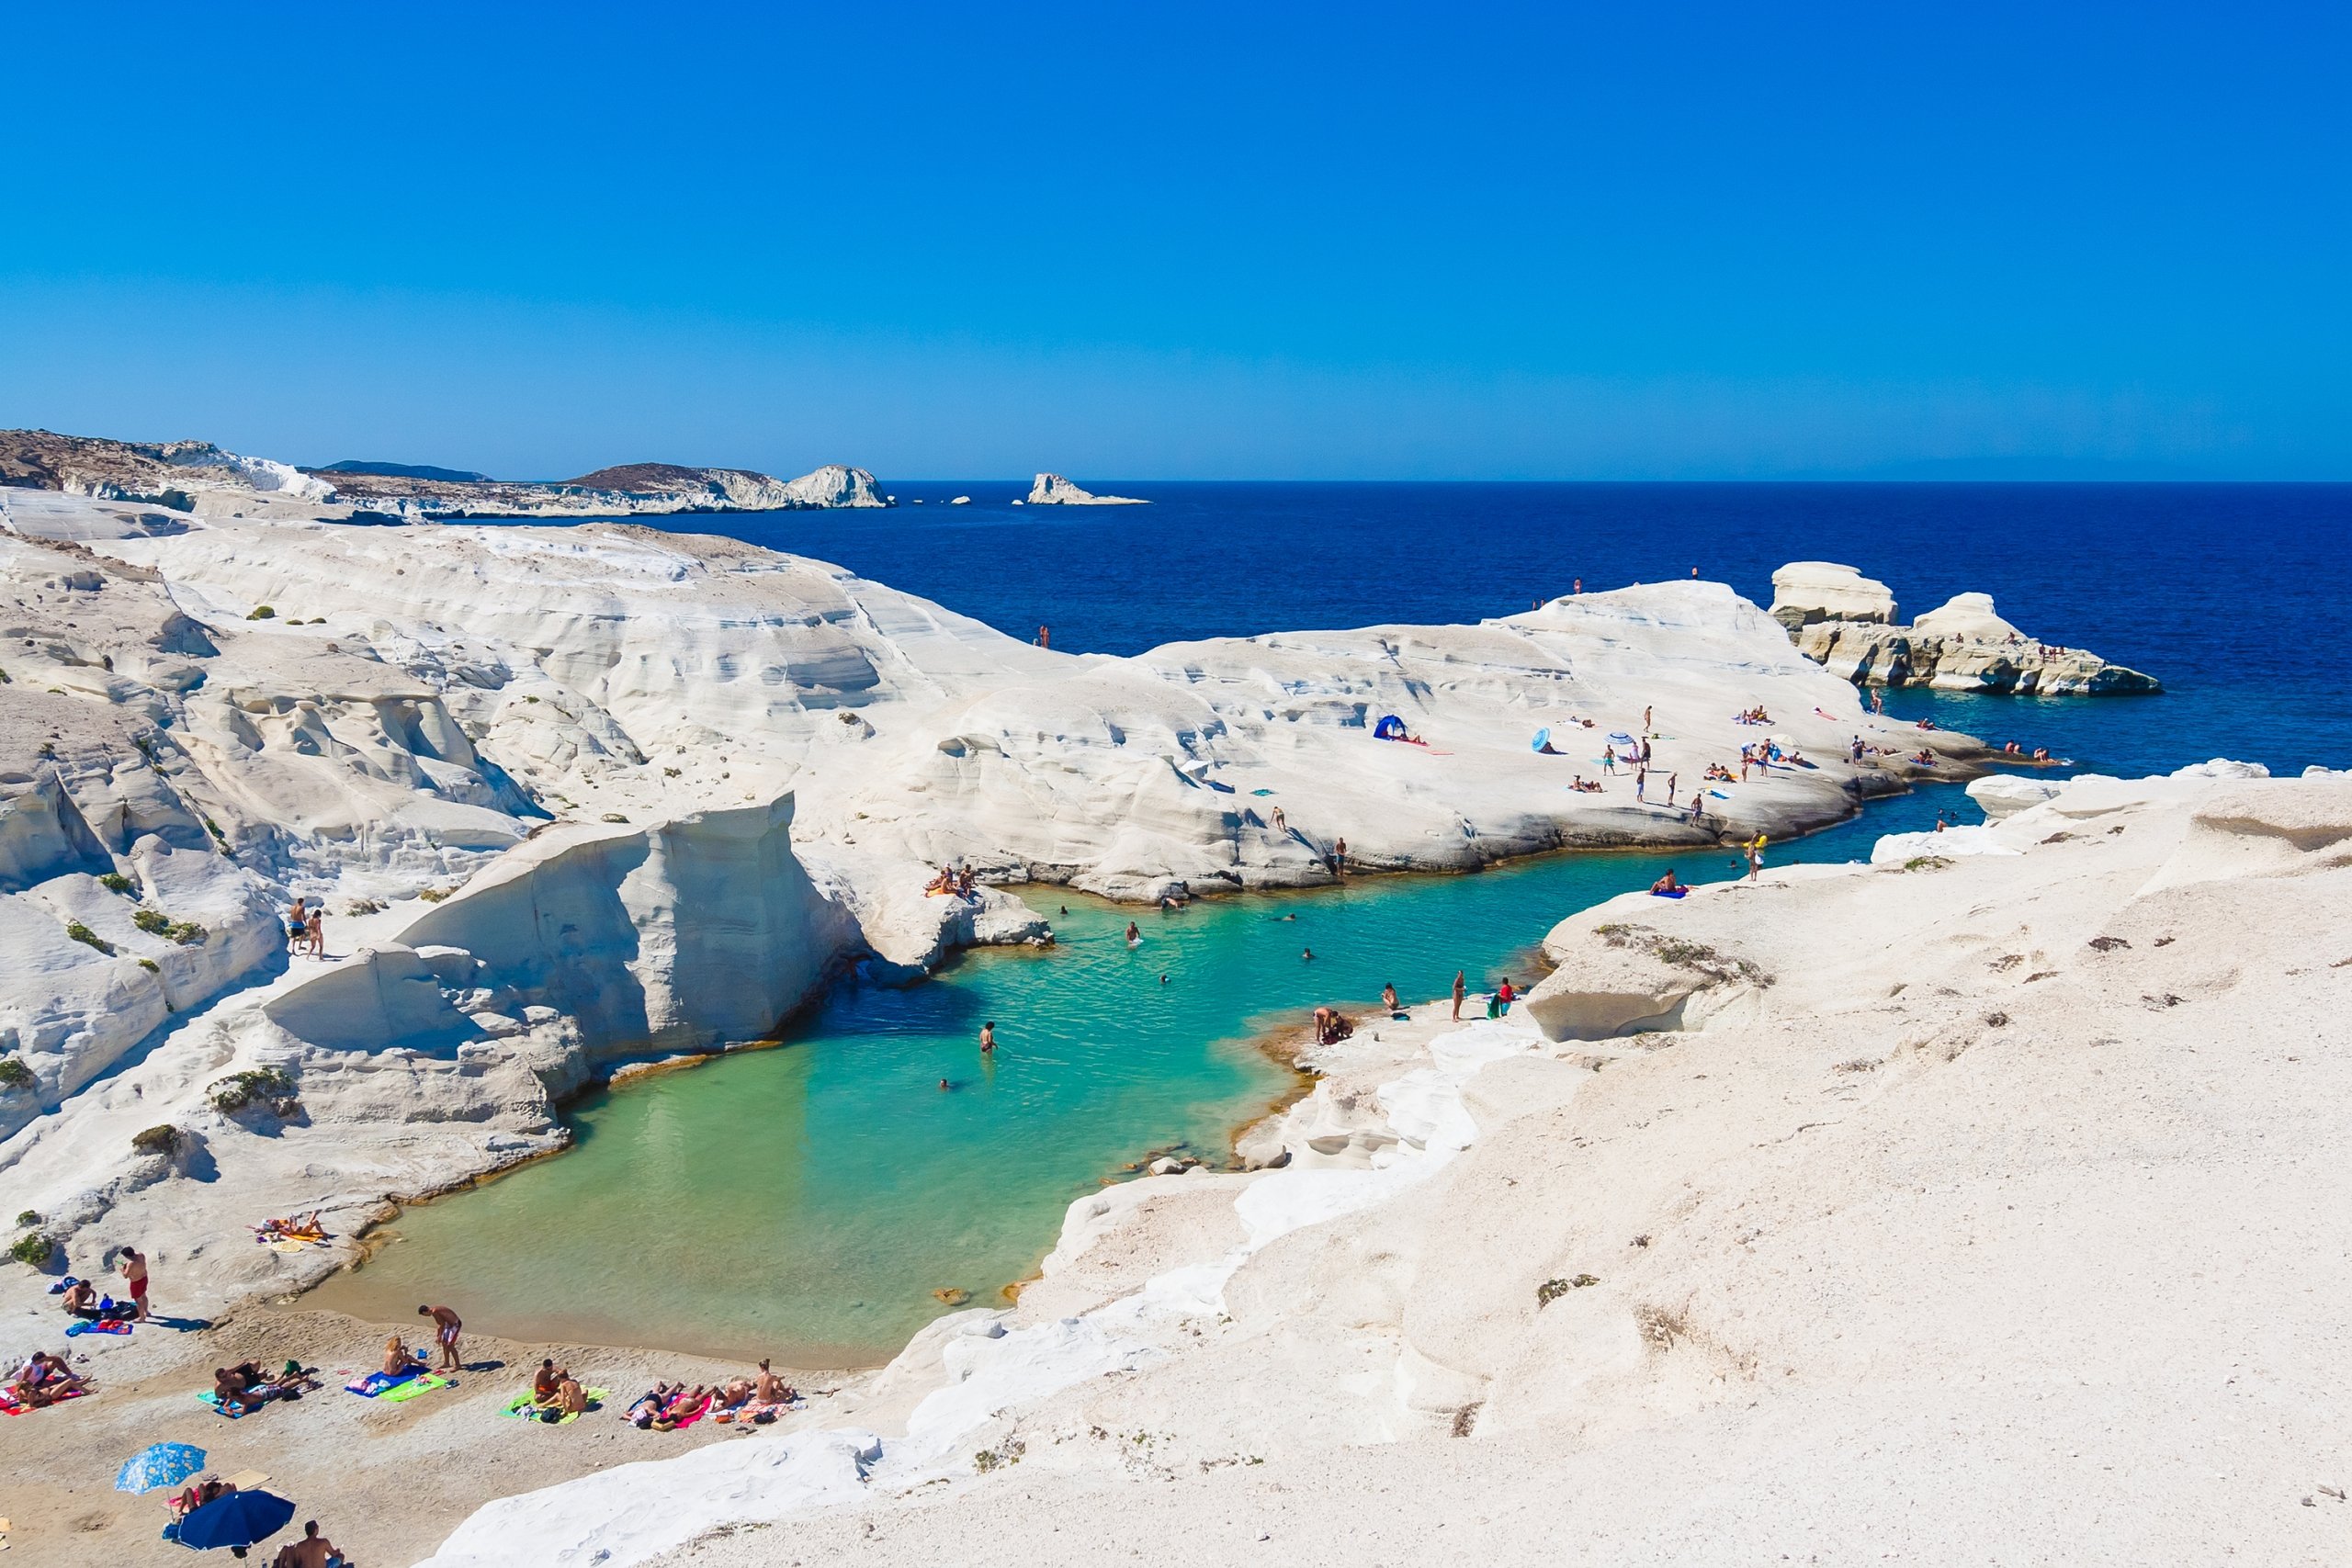 The sandy coves of Sarakiniko Beach, Milos, are part of one of the most beautiful beaches in Greece